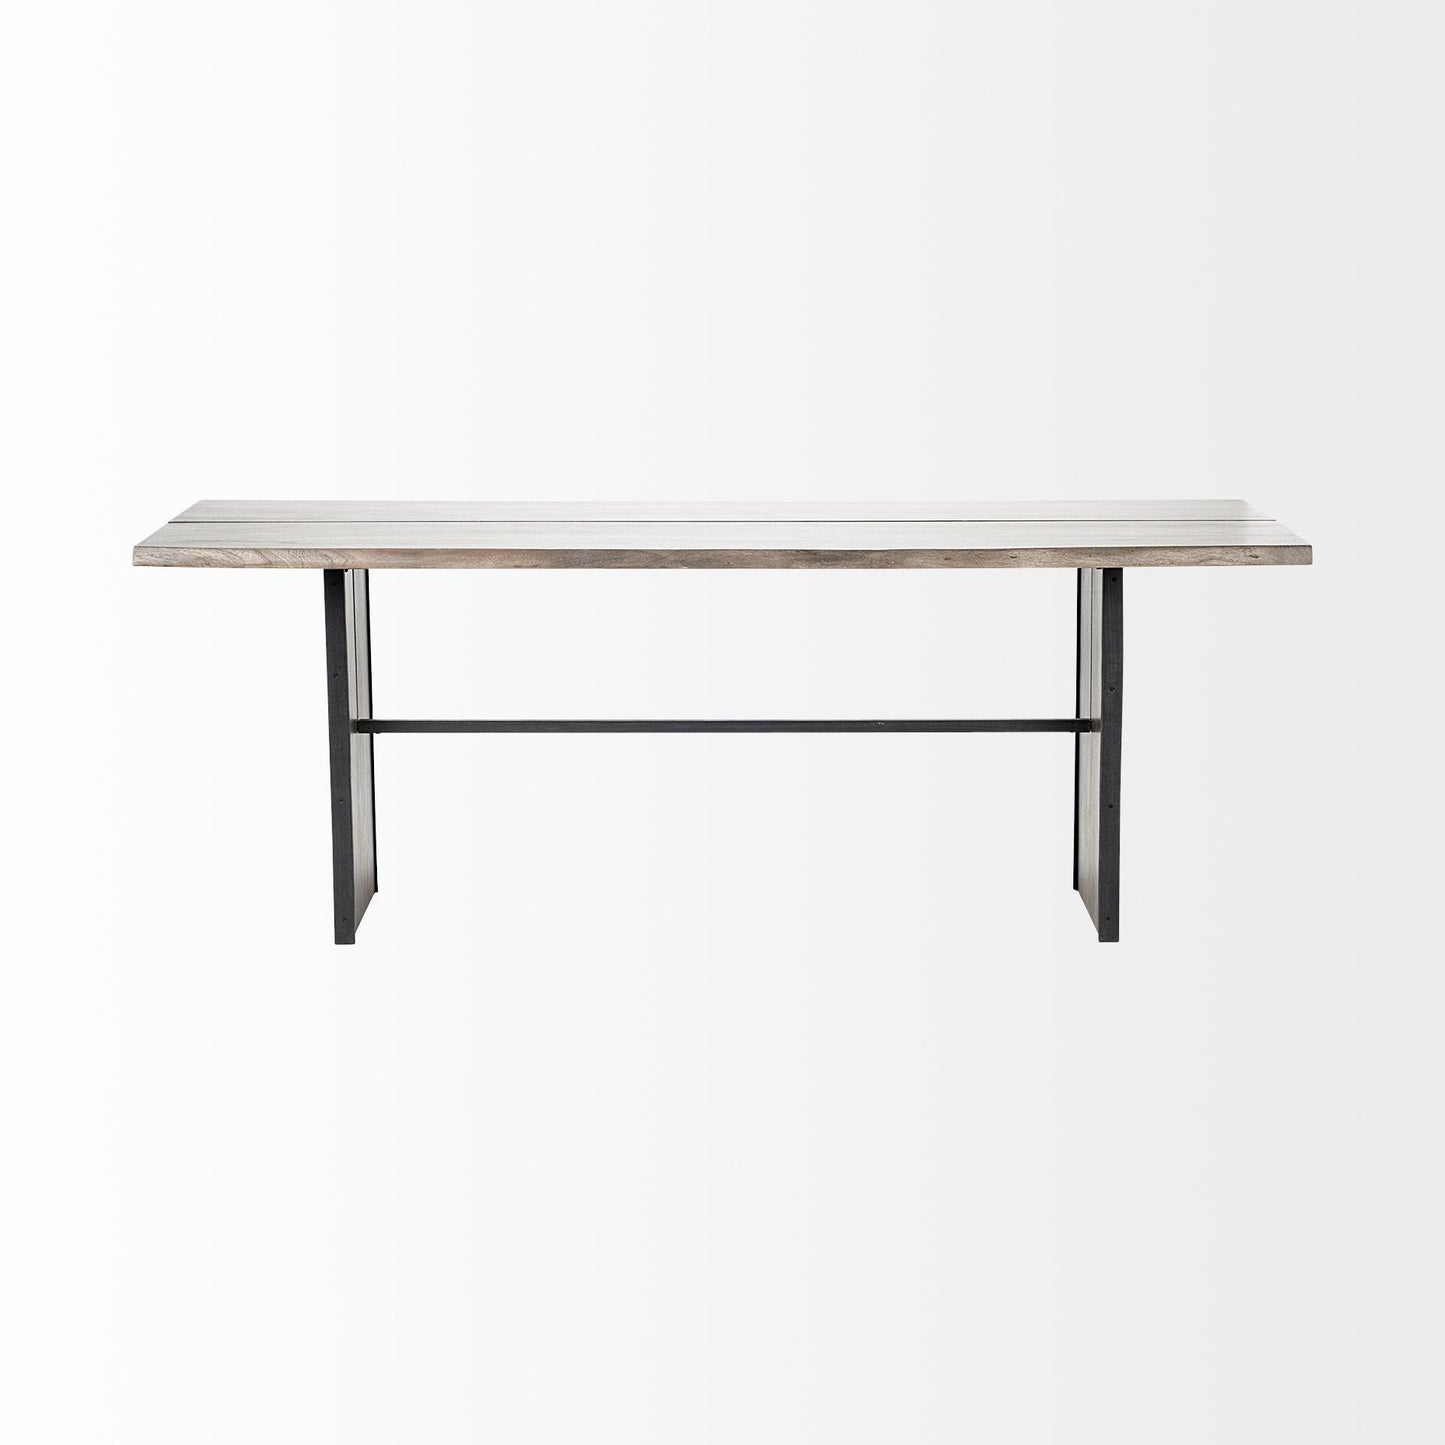 Ledger III Table - 1 Bench & 4 Chairs